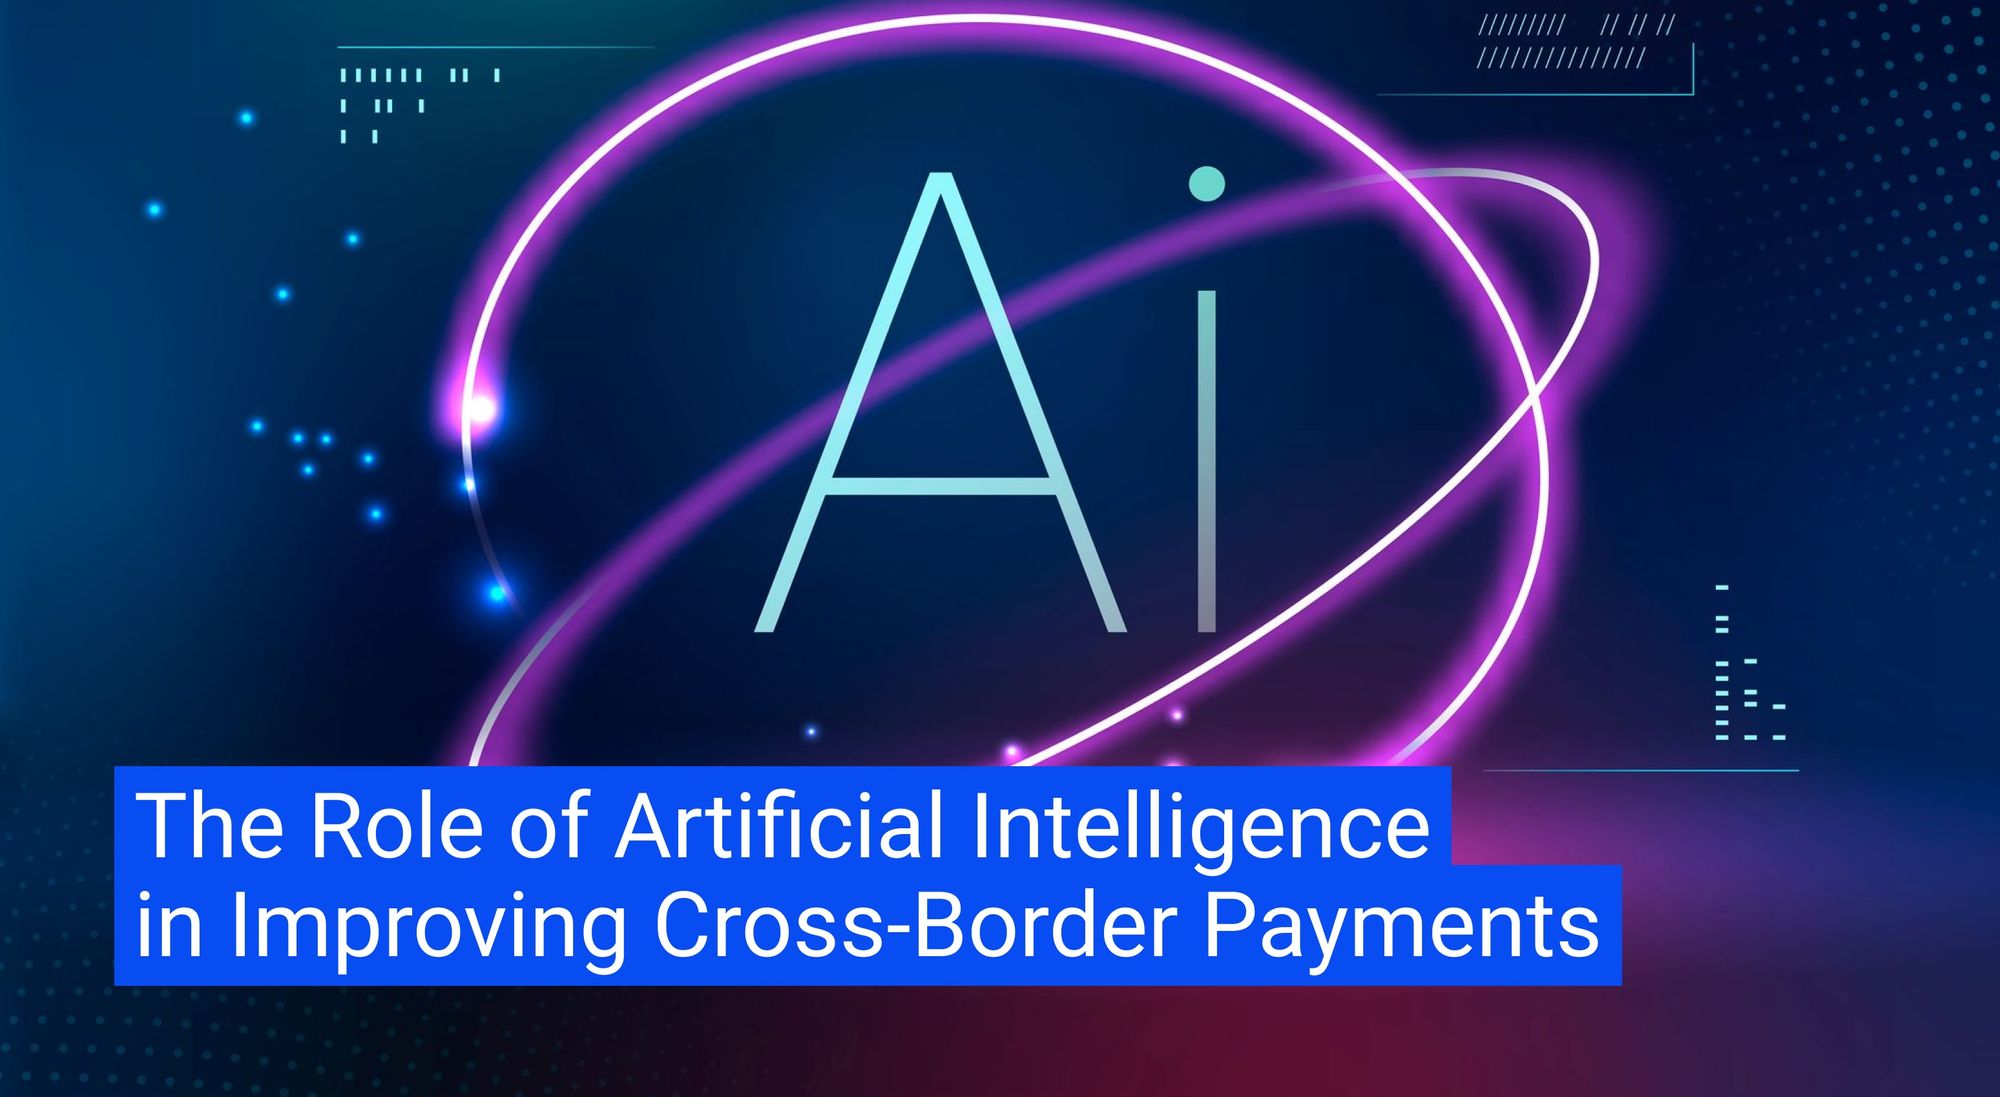 The Role of Artificial Intelligence in Improving Cross-Border Payments